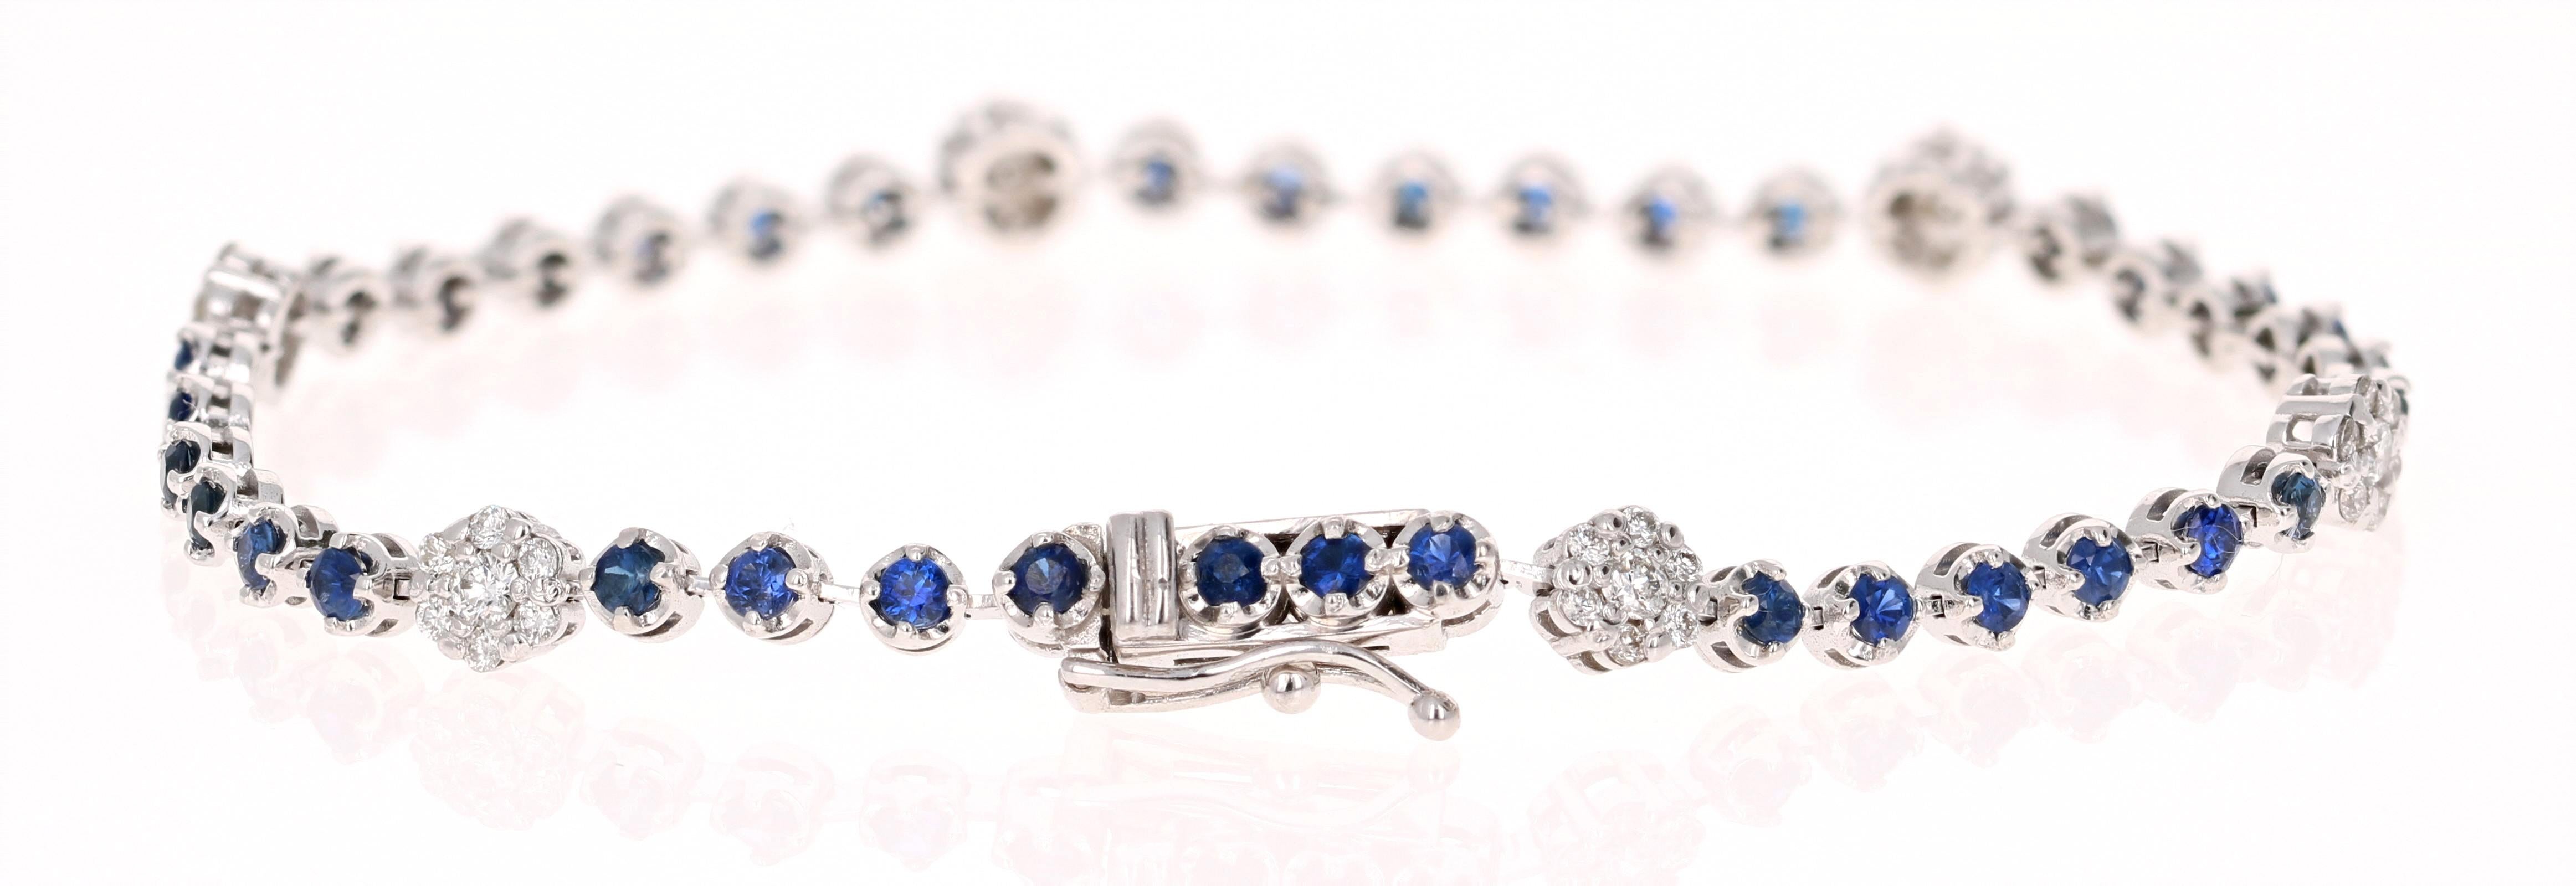 Dainty, Delicate, and Beautiful. 
A 14K White Gold Blue Sapphire and Diamond Bracelet with a flower design. 

The 37 Round Cut Blue Sapphires are 1.84 carats and the 42 Round Cut Diamonds are 0.61 carats, with a total carat weight of 2.45 carats.